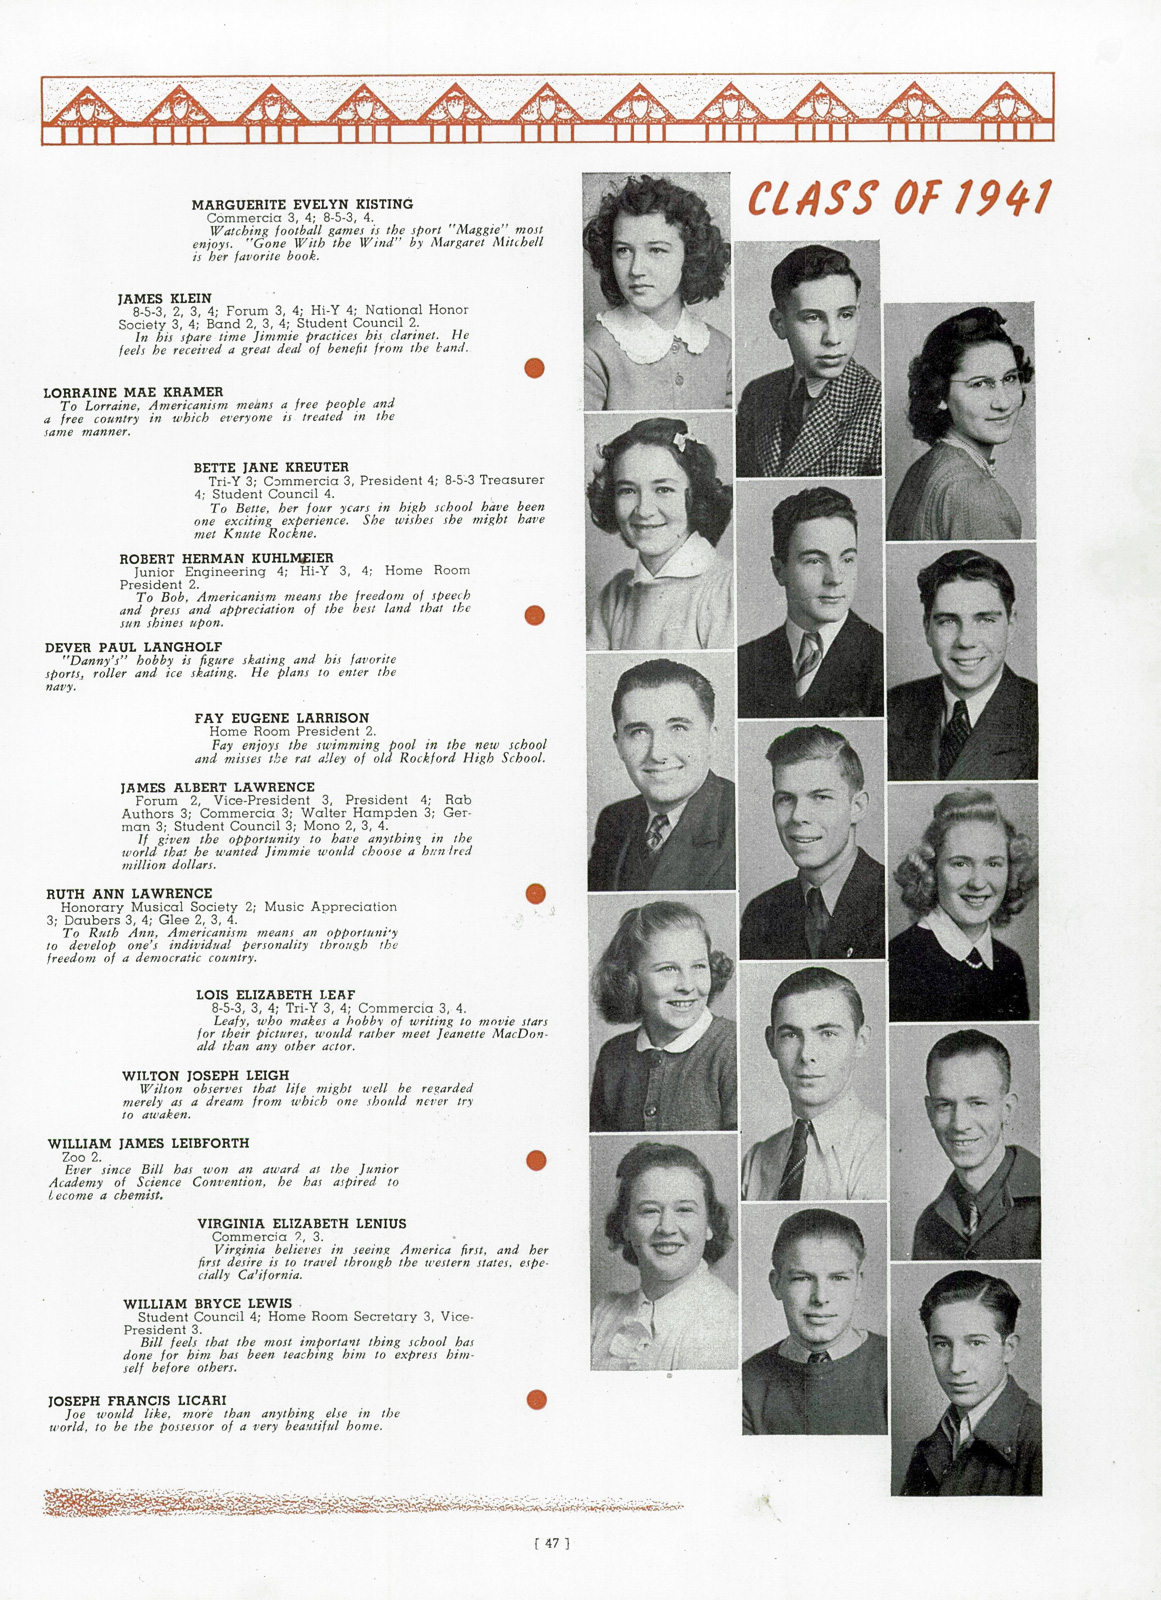 Ruth 1941 yearbook